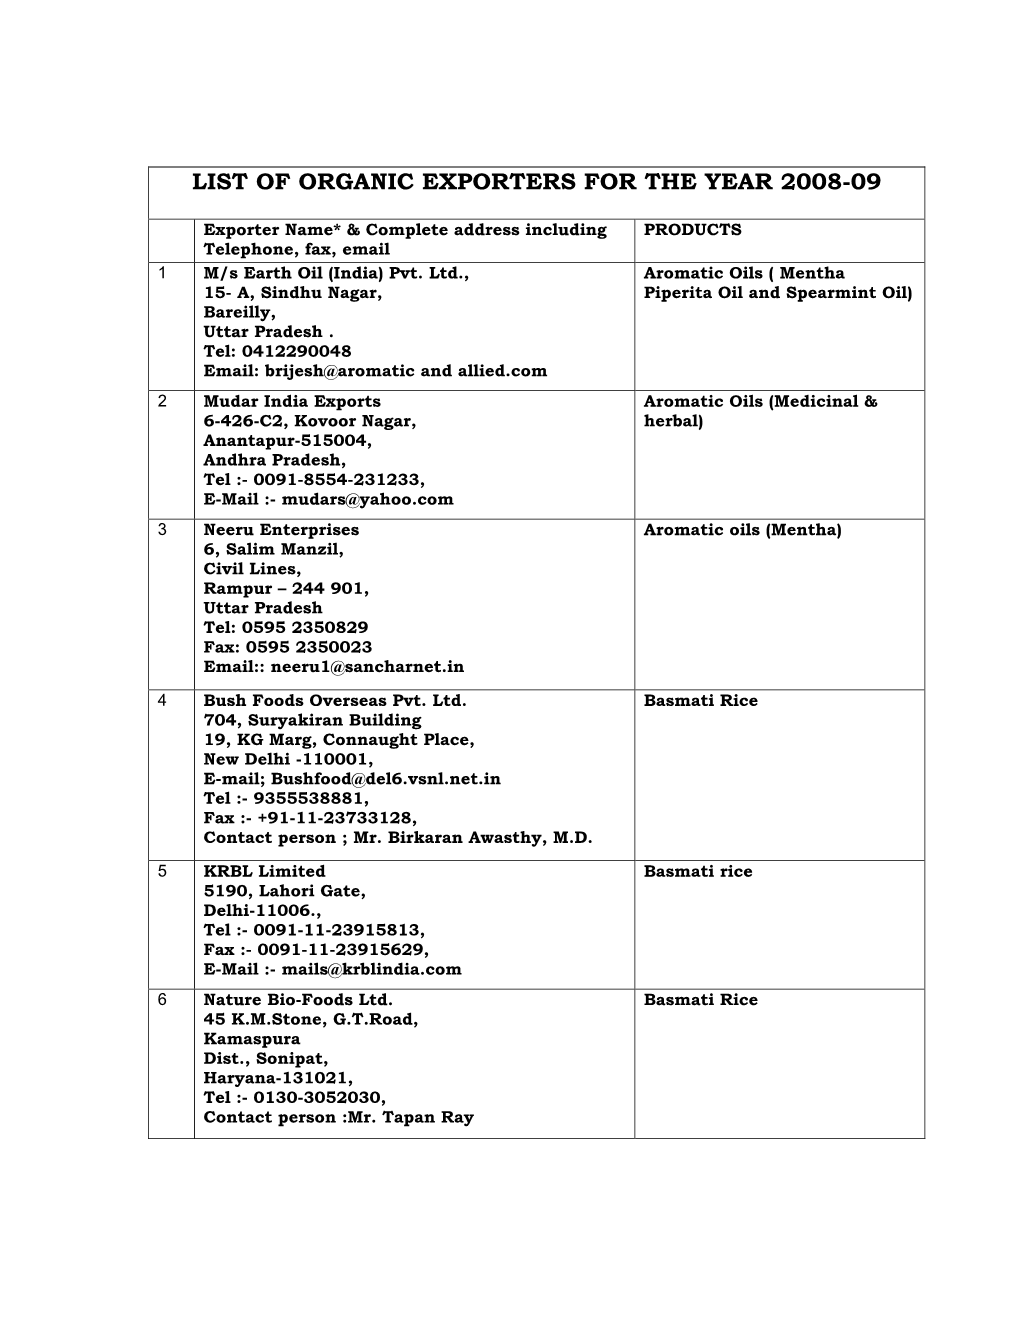 List of Organic Exporters for the Year 2008-09